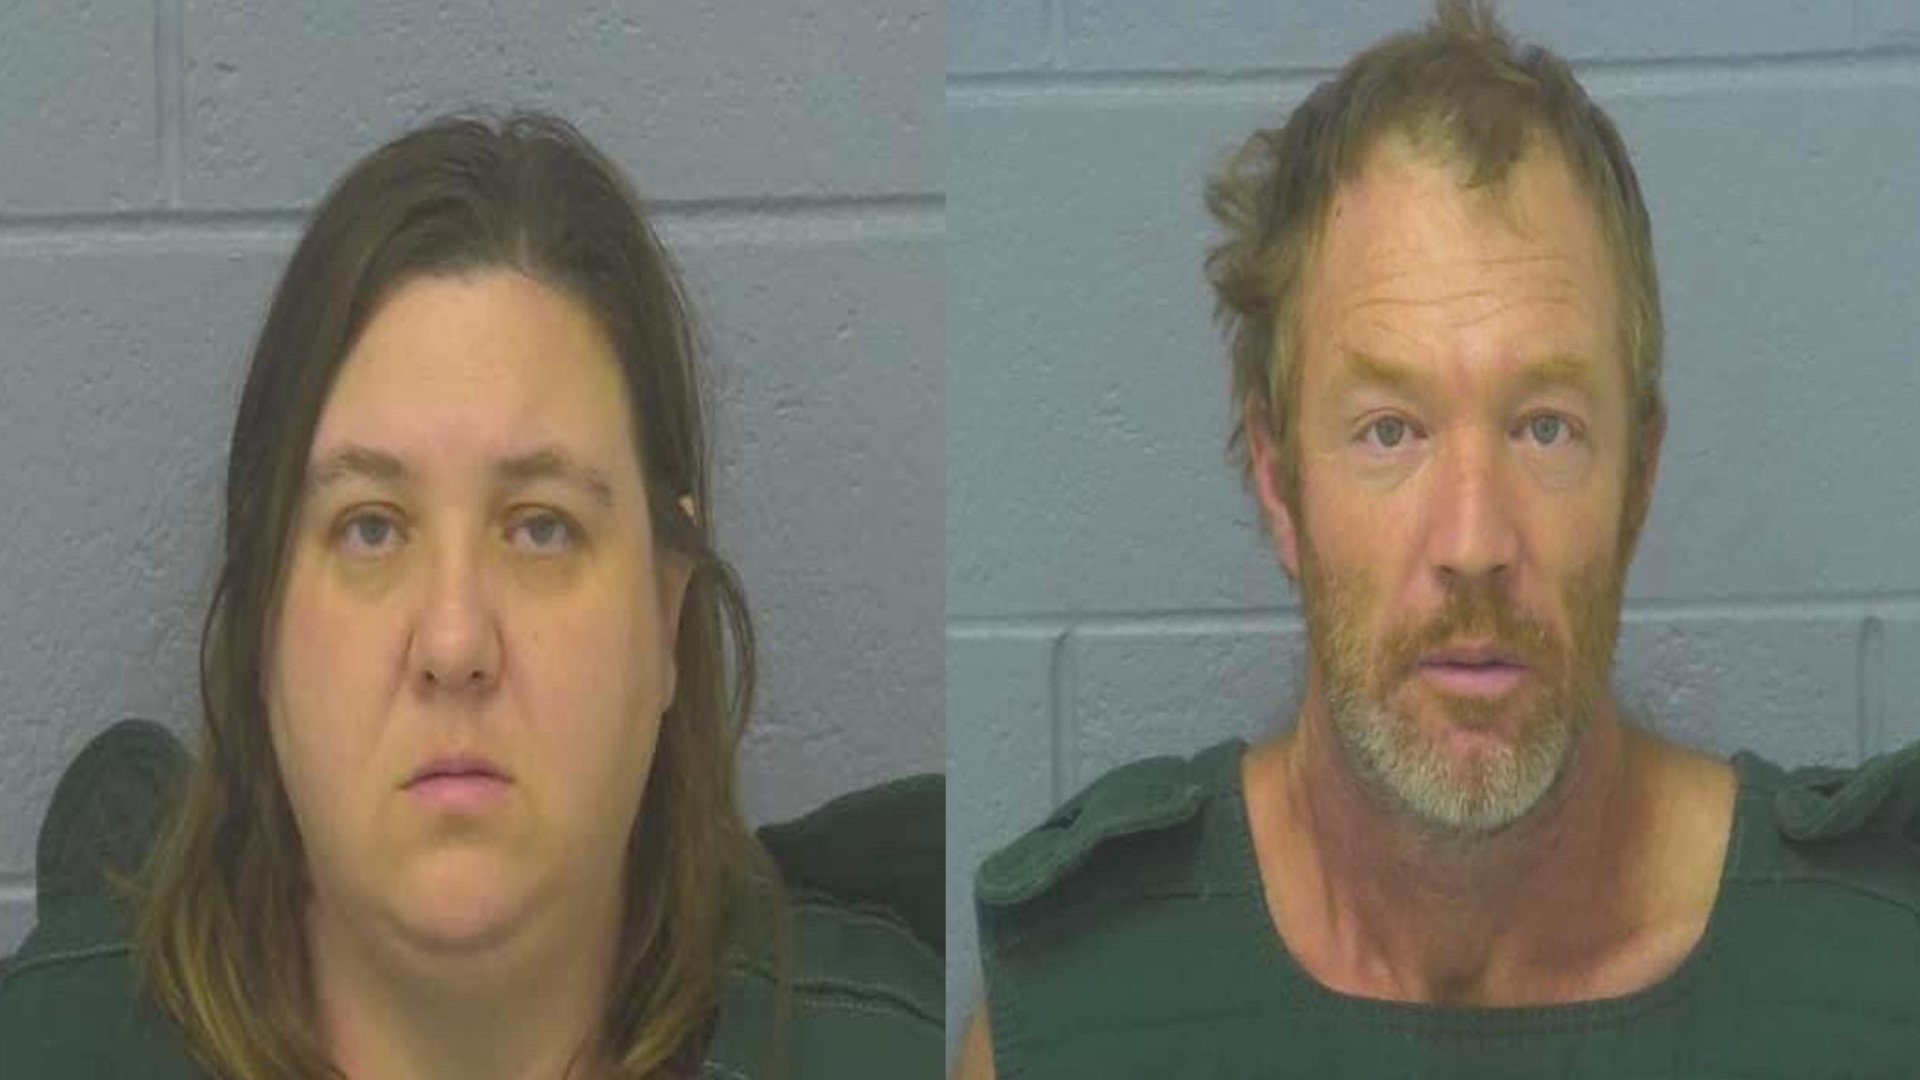 Jury trials for Amber and Jamie Waterman will be held on June 5, 2023, for their roles in the alleged kidnapping and murder of Ashley Bush.